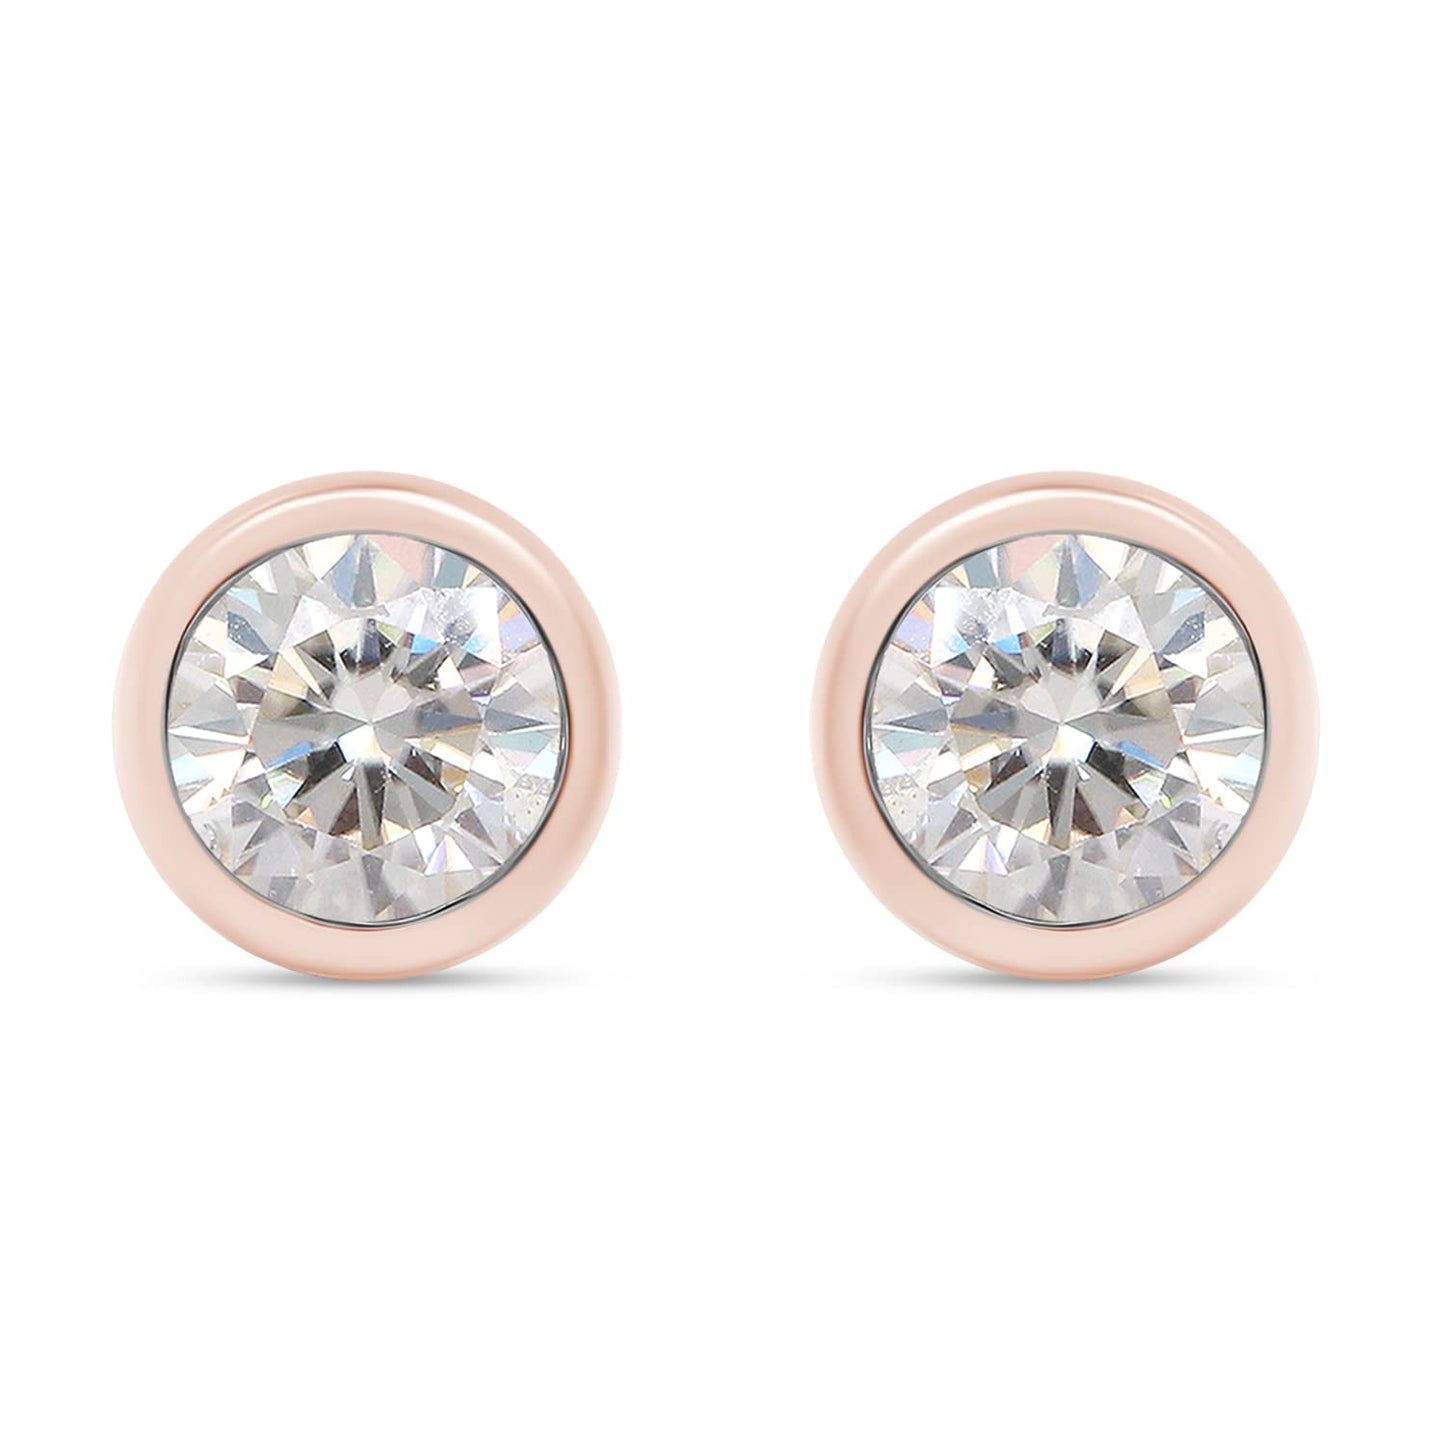 0.85 Carat Round Cut Lab Created Moissanite Diamond Solitaire Stud Earrings In 925 Sterling Silver For Women